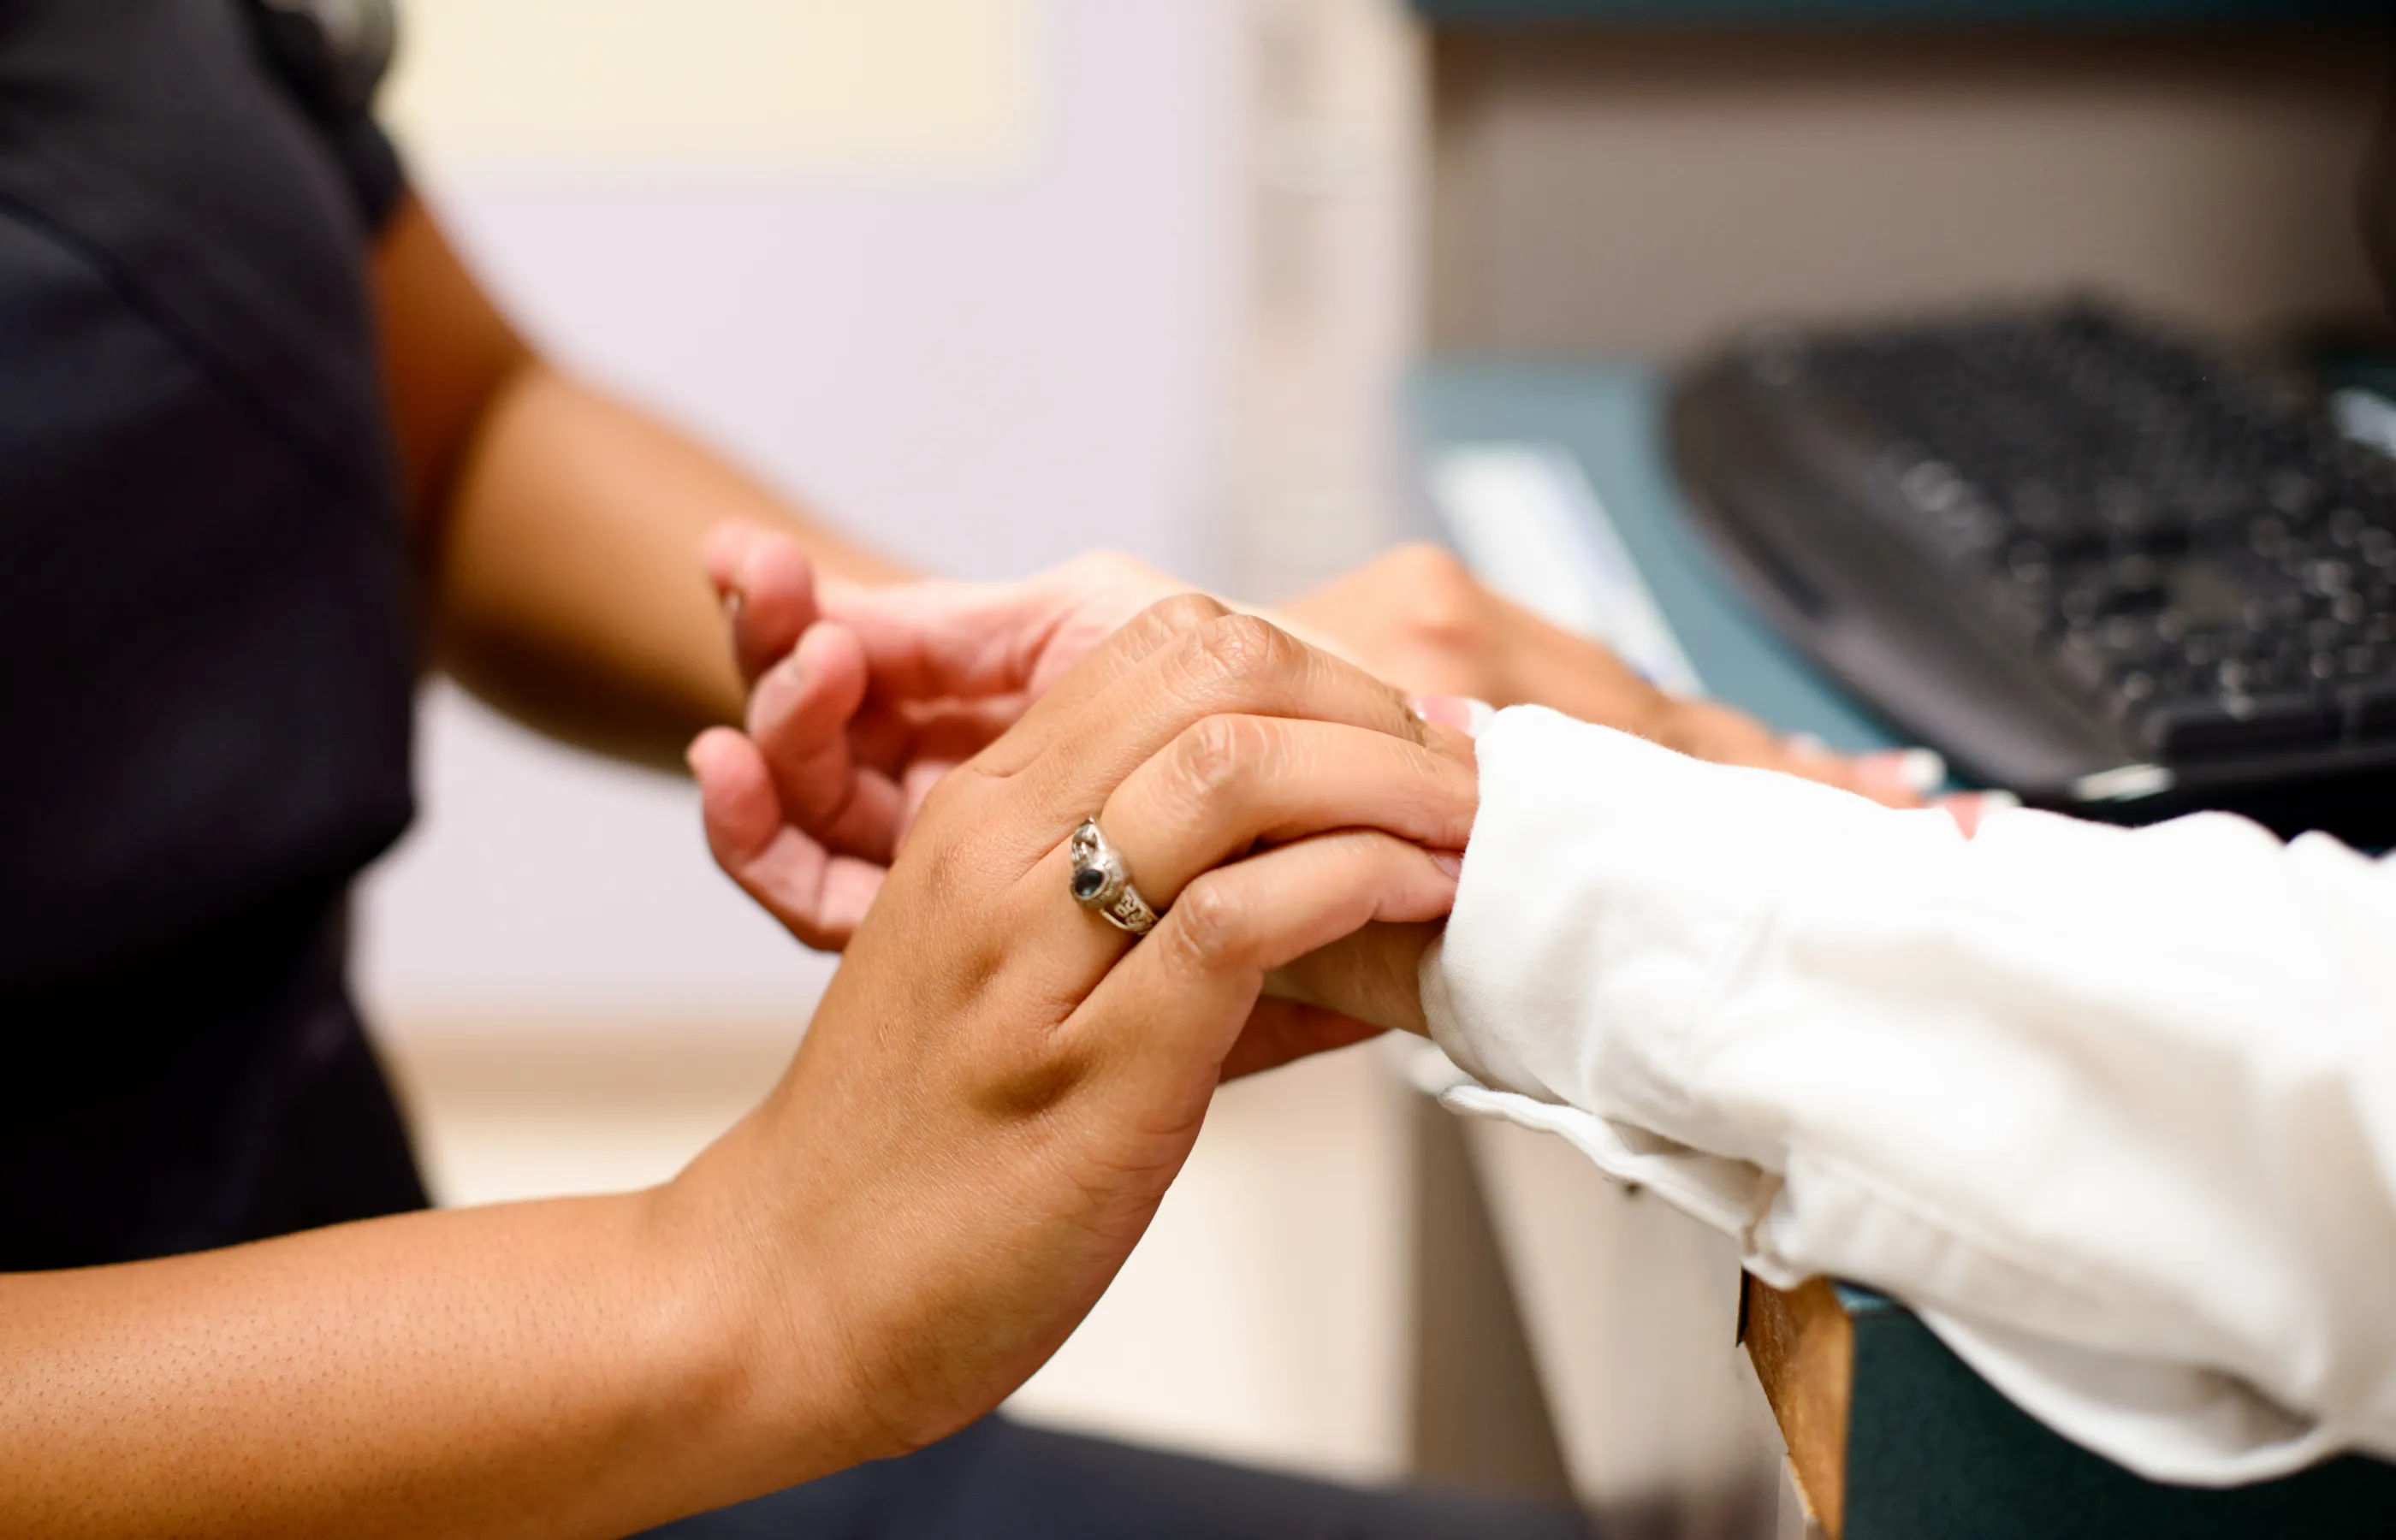 Nurse and patient are sitting across from each other in a clinic exam room. The nurse holds and positions the patients hands to check for their pulse. 